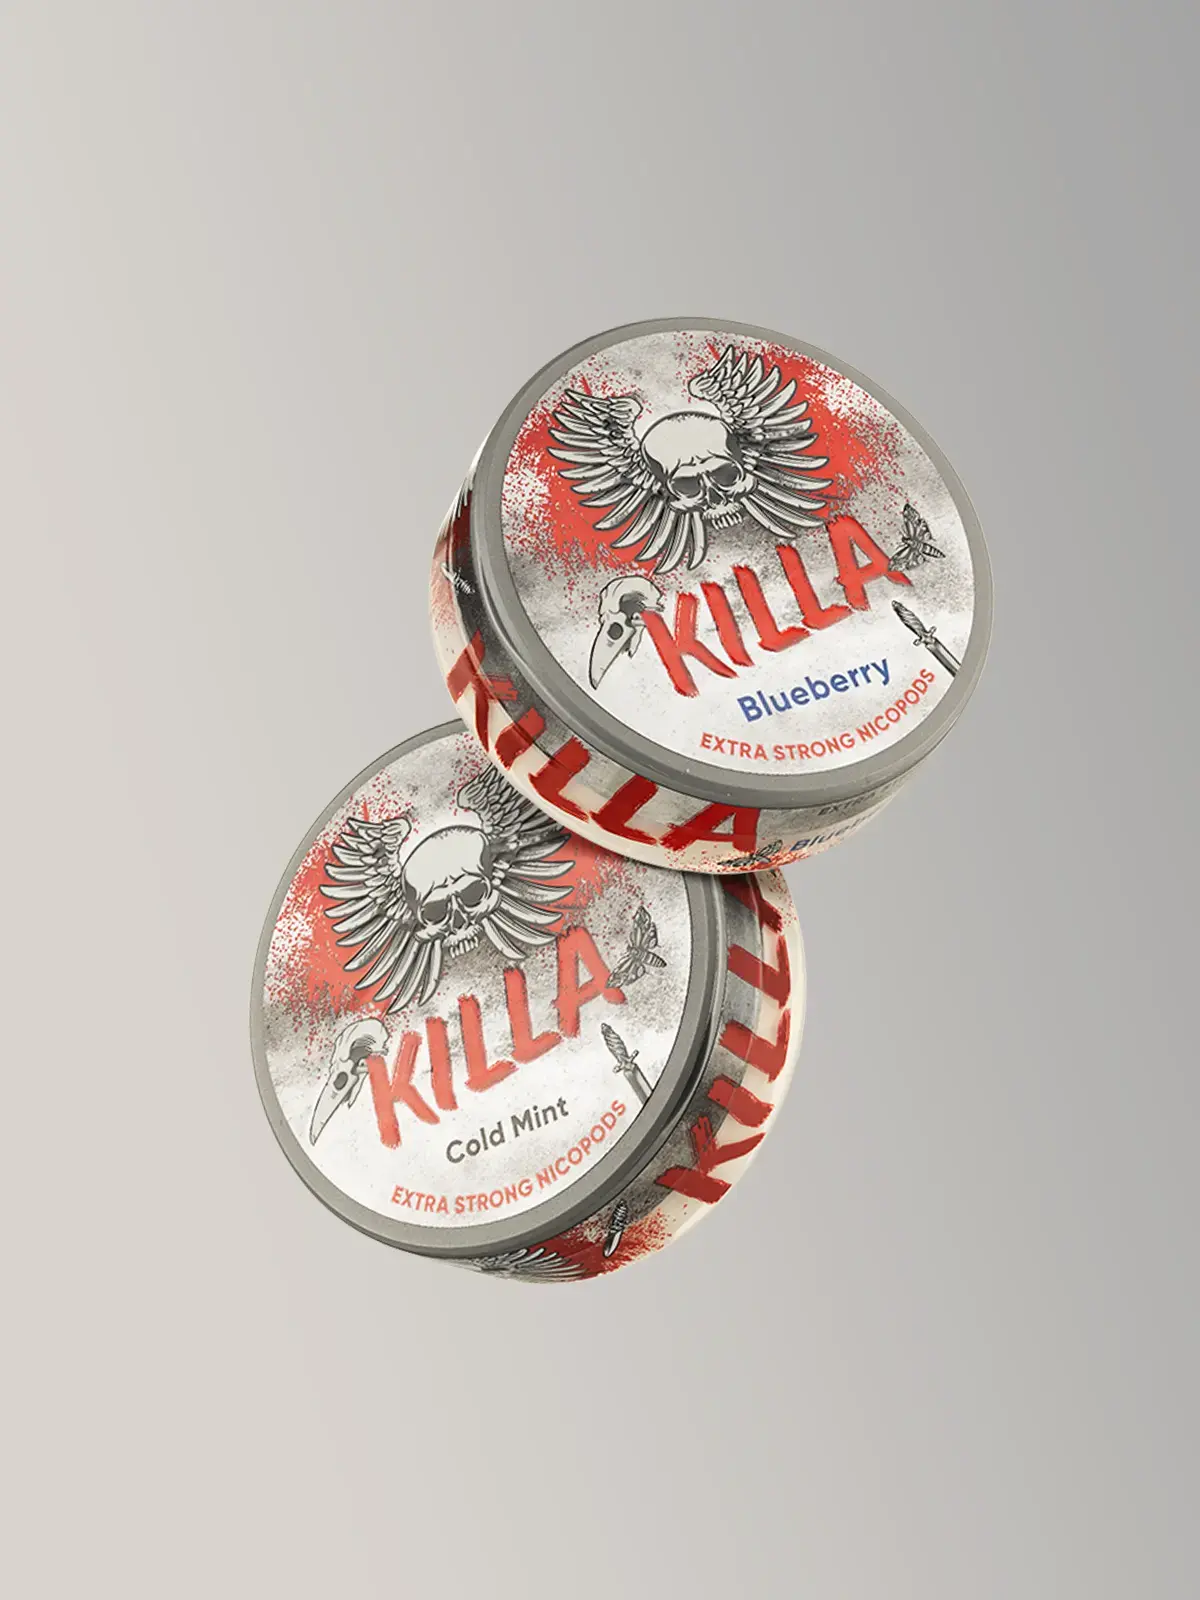 Two cans of Killa nicotine pouches; Blueberry and Cold Mint flavours floating in front of a light grey background